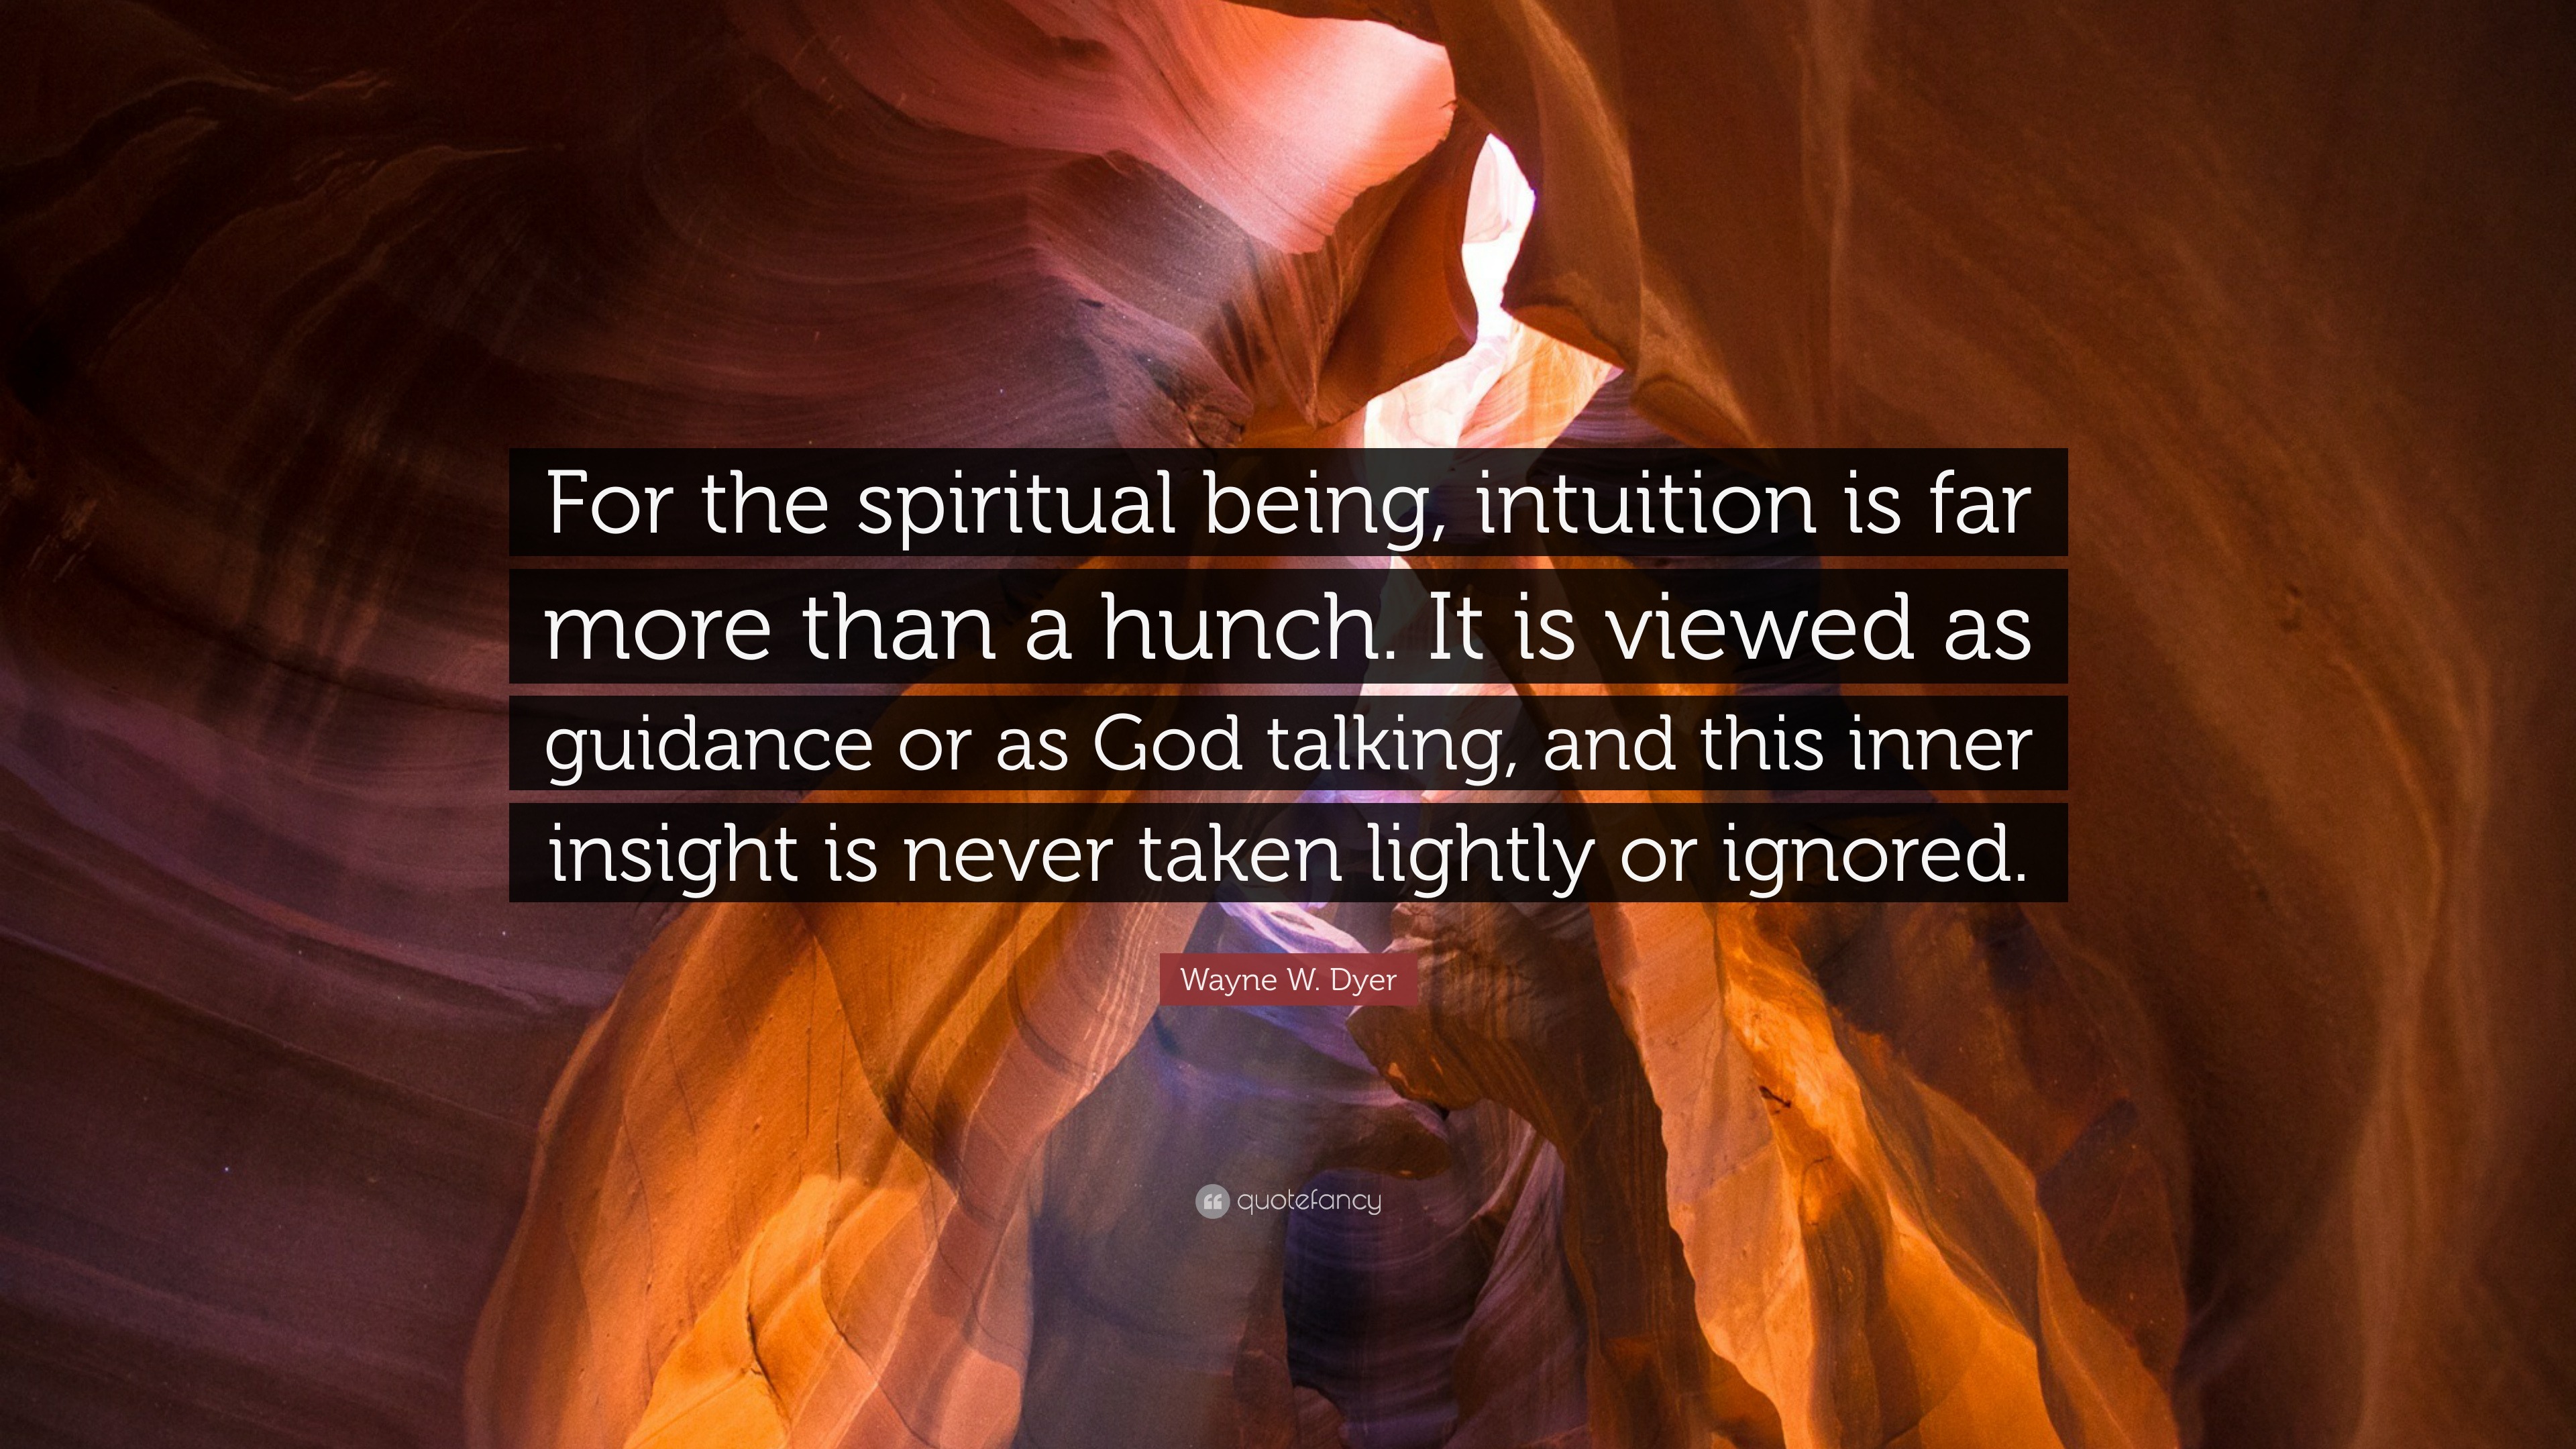 Wayne W. Dyer Quote: “For the spiritual being, intuition is far